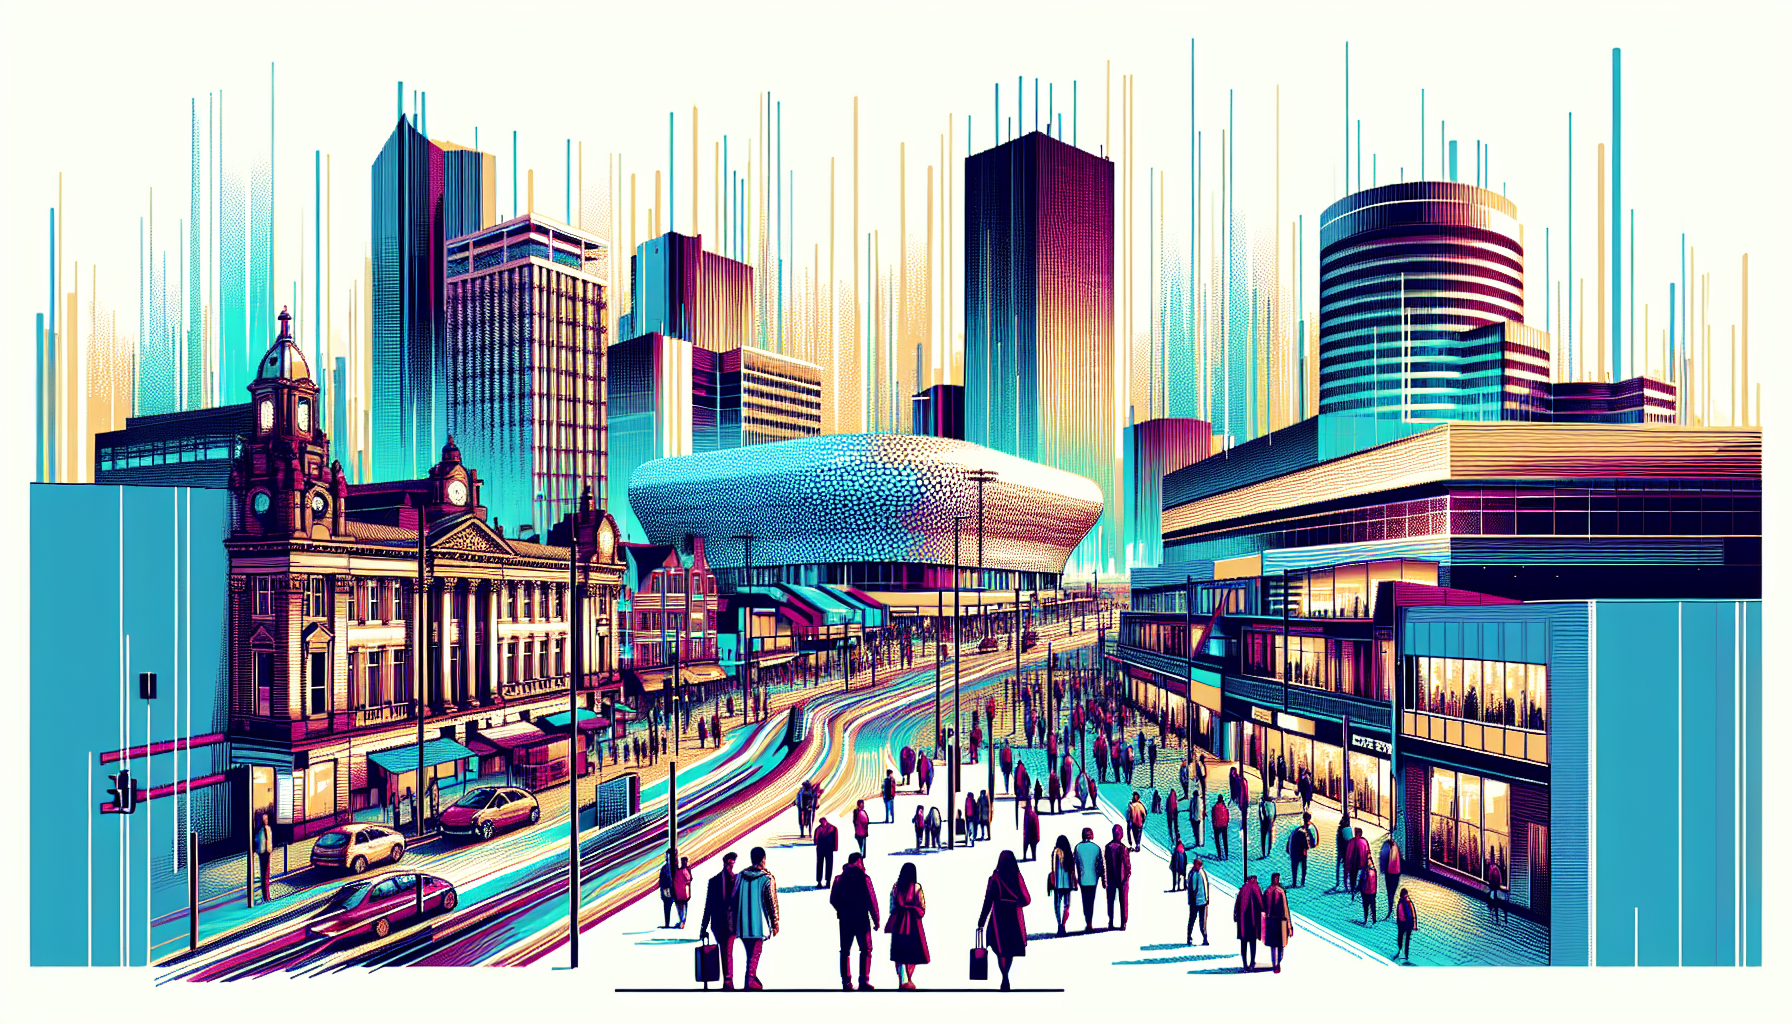 A vibrant, modern skyline of Birmingham featuring futuristic architecture, bustling streets filled with a mix of historic and contemporary elements, and prominent landmarks like the Bullring. The scen